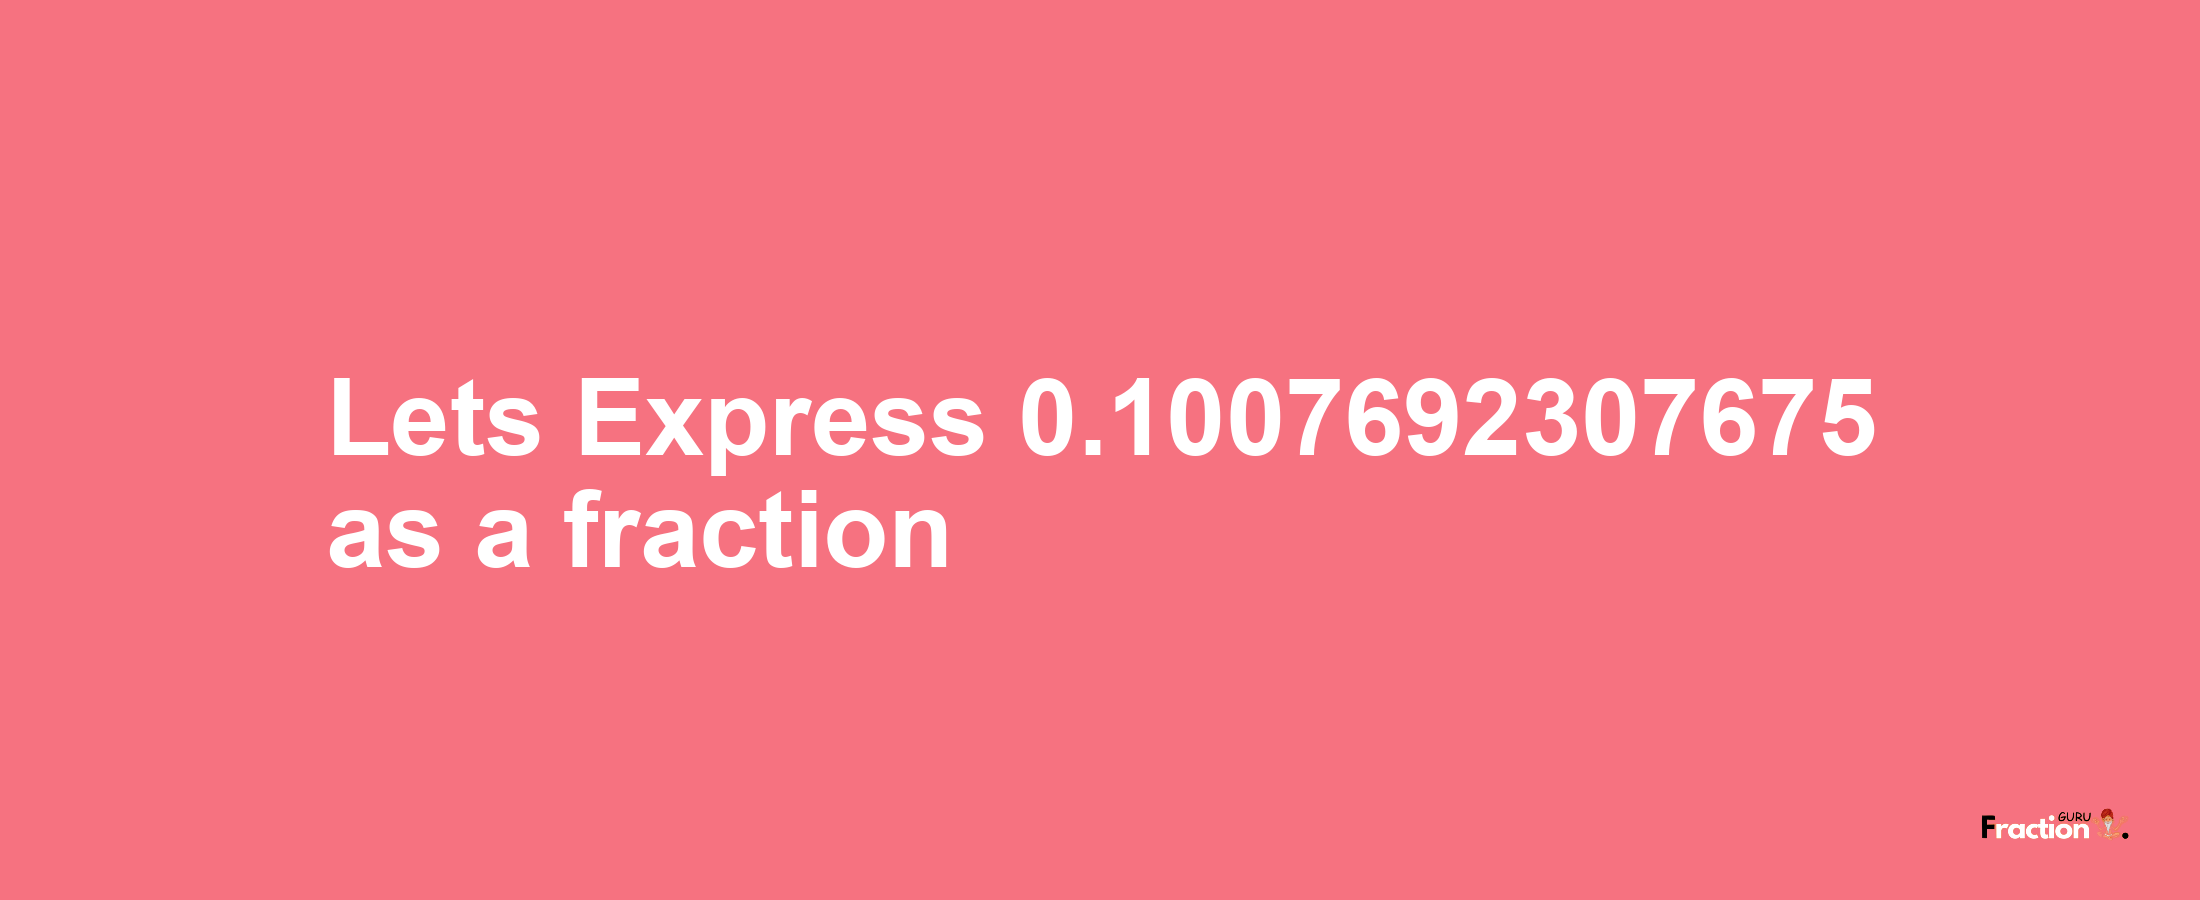 Lets Express 0.1007692307675 as afraction